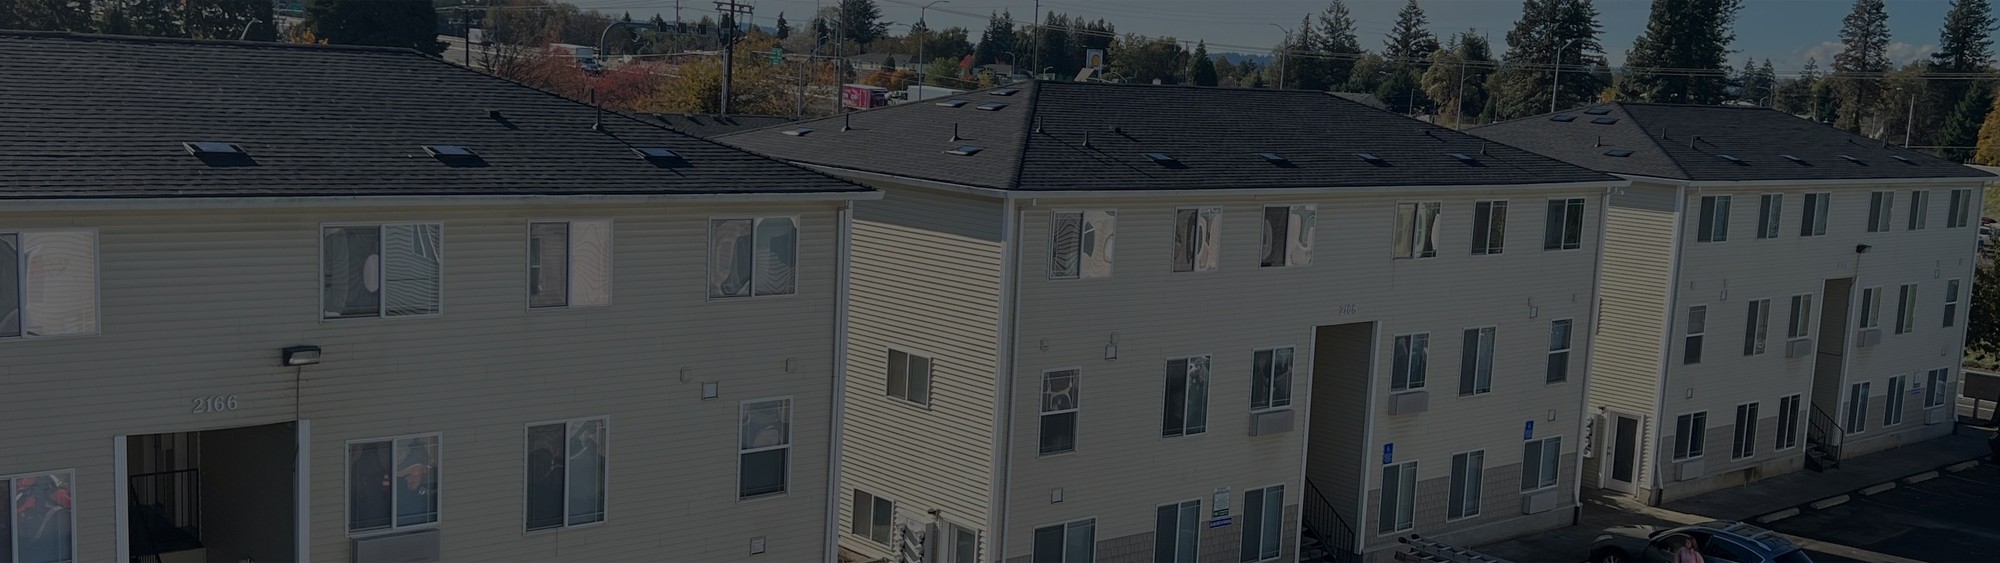 Commercial Roofing Company in Vancouver